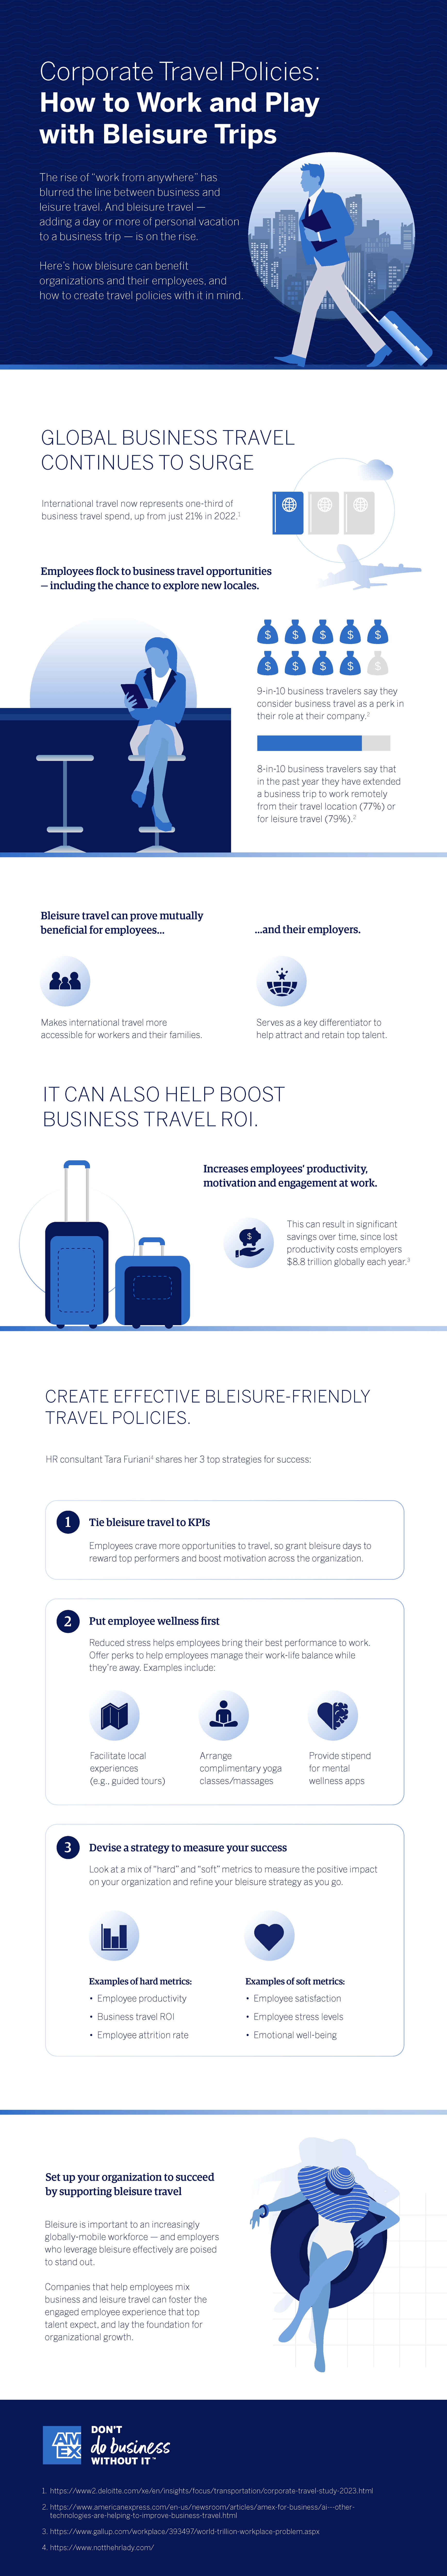 Corporate Travel Policies: How to Work and Play with Bleisure Trips